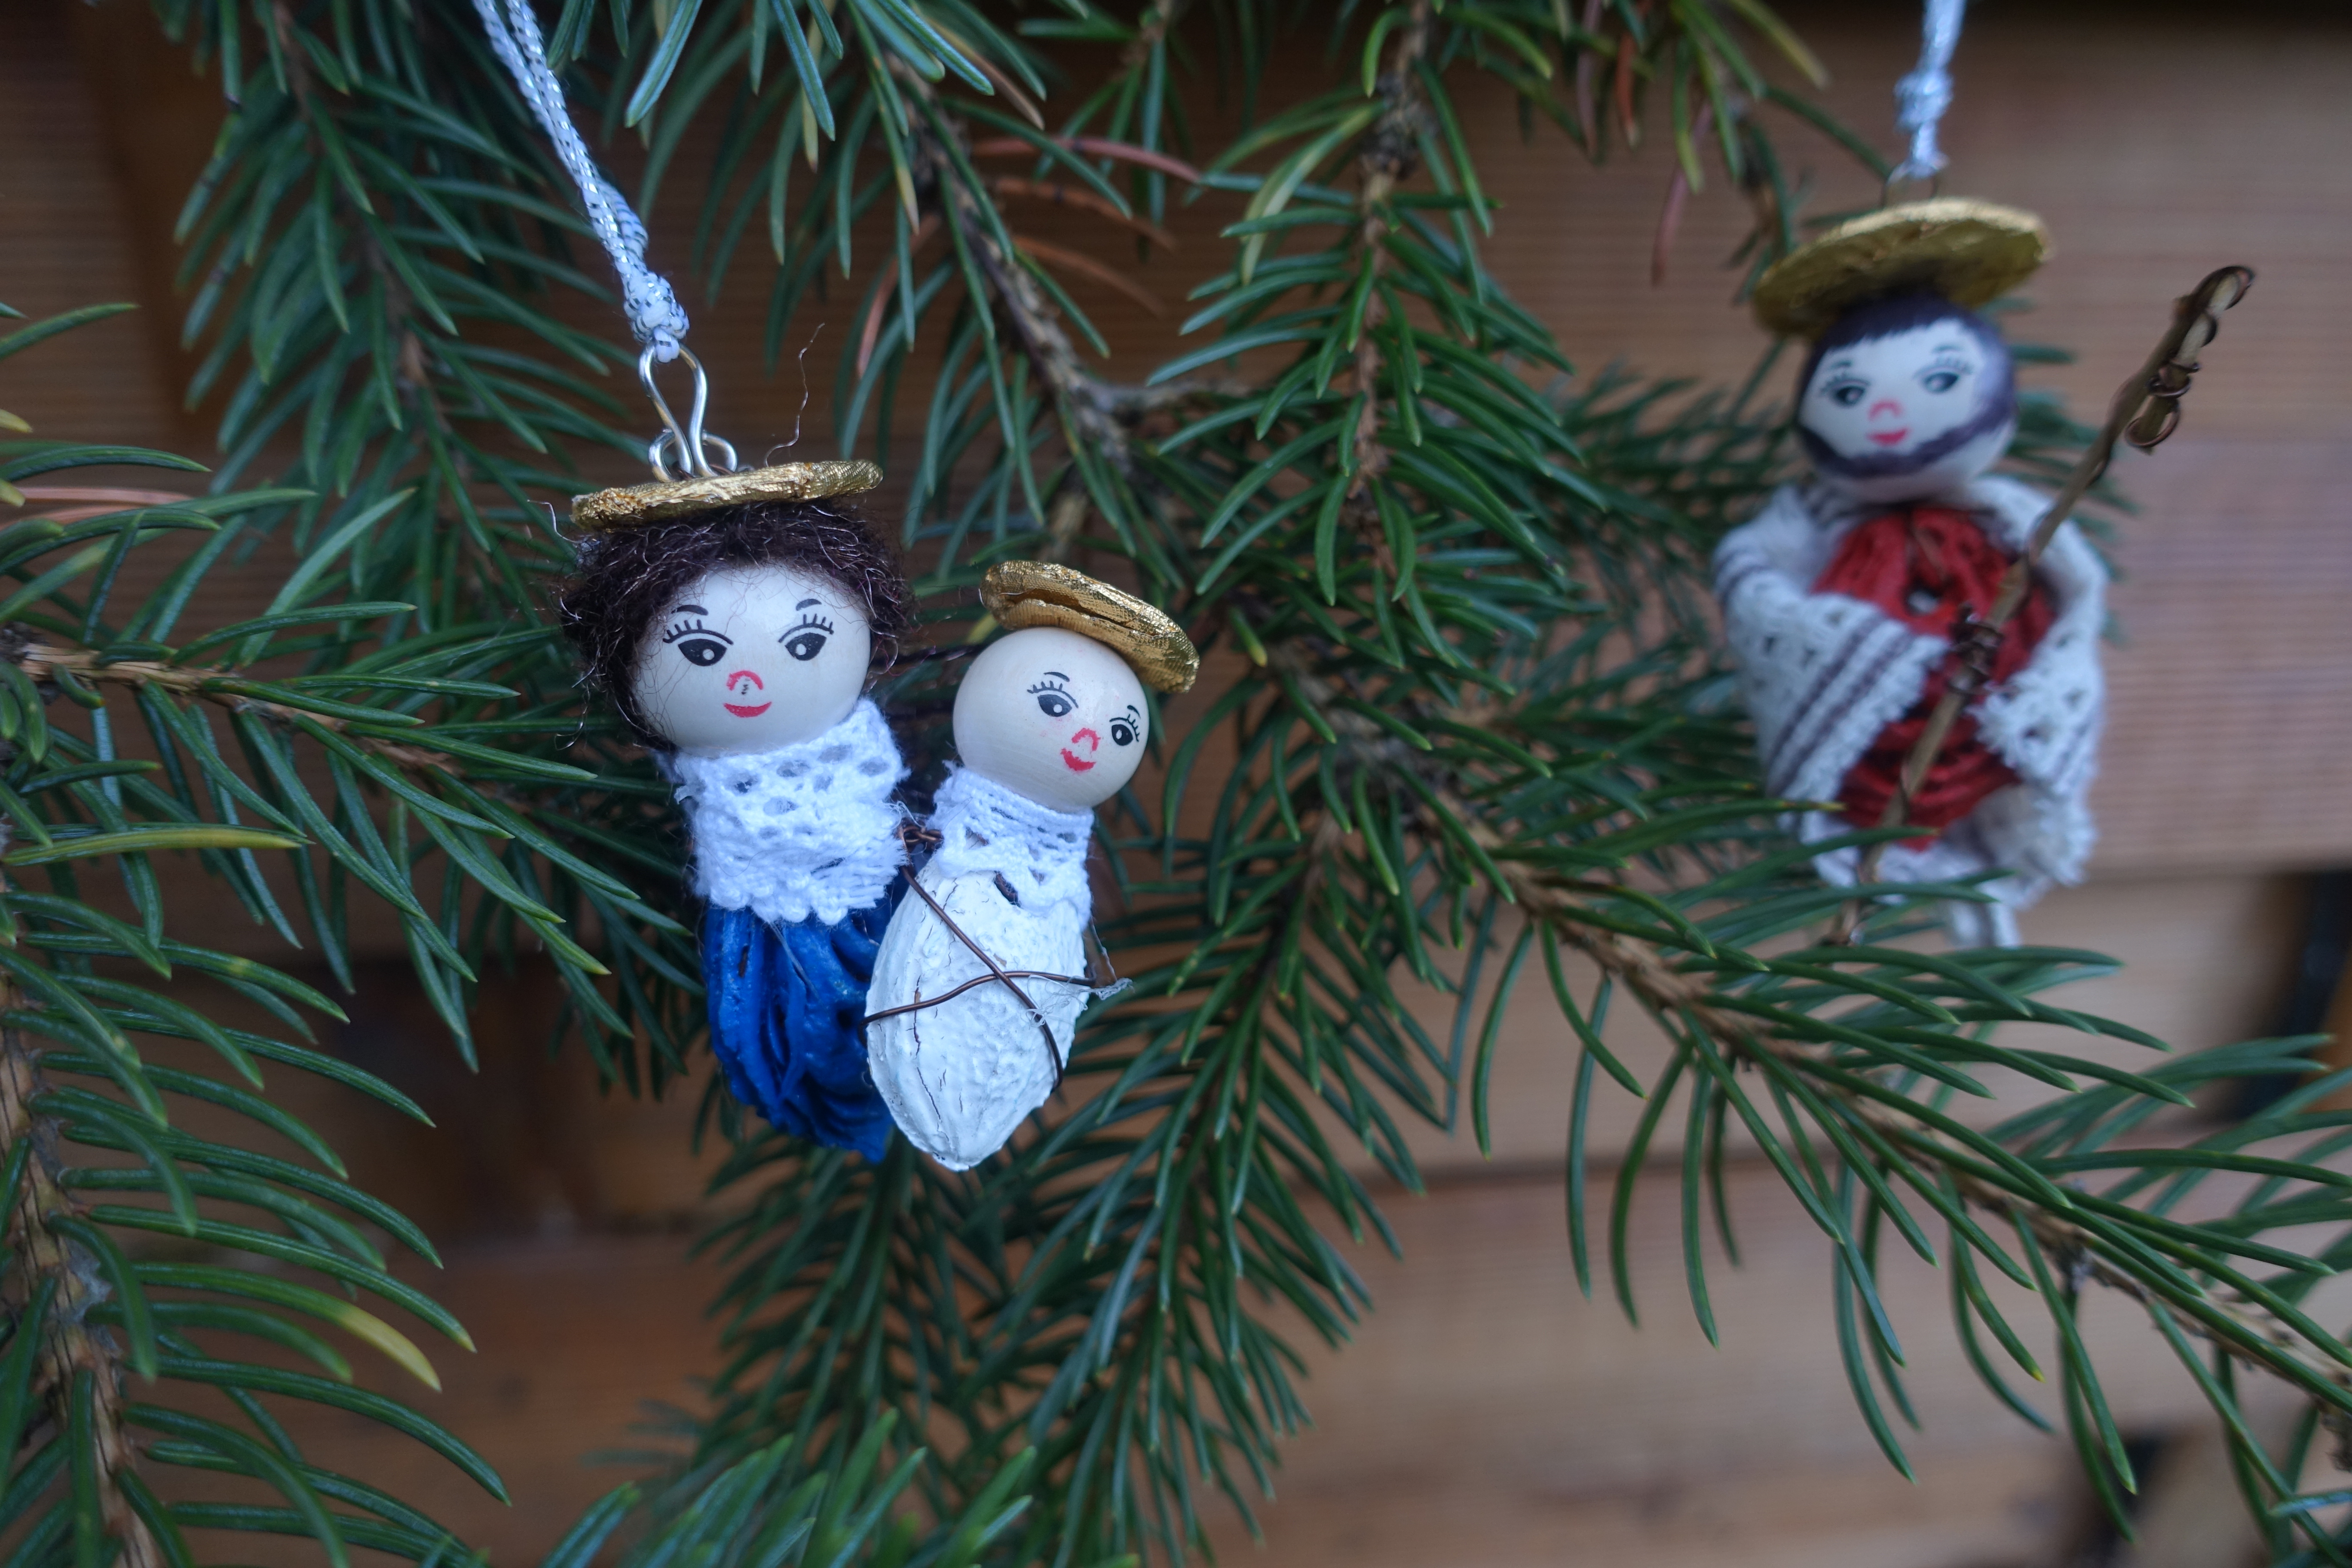 Ornaments of Mary holding Jesus and Joseph hanging on a tree